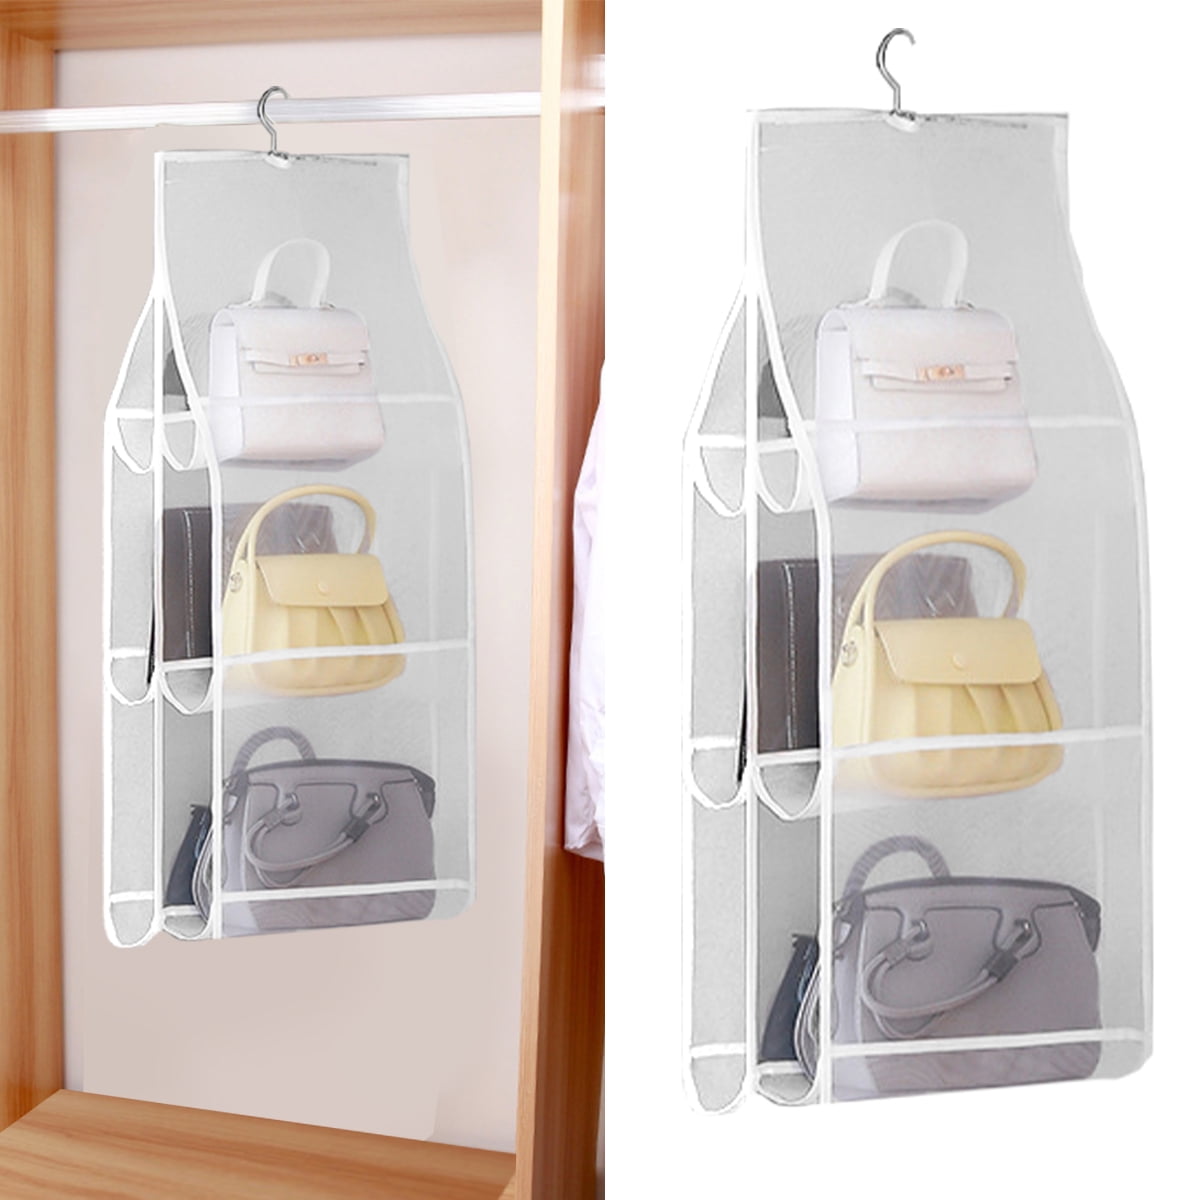 Umbra Stash Over the Rod Hanging Organizer Set of 2 Fabric organizer with Mesh Pockets for Scarves Gloves and other Accessories for Entryway Closet Mudroom and Closet Coat Room Grey 